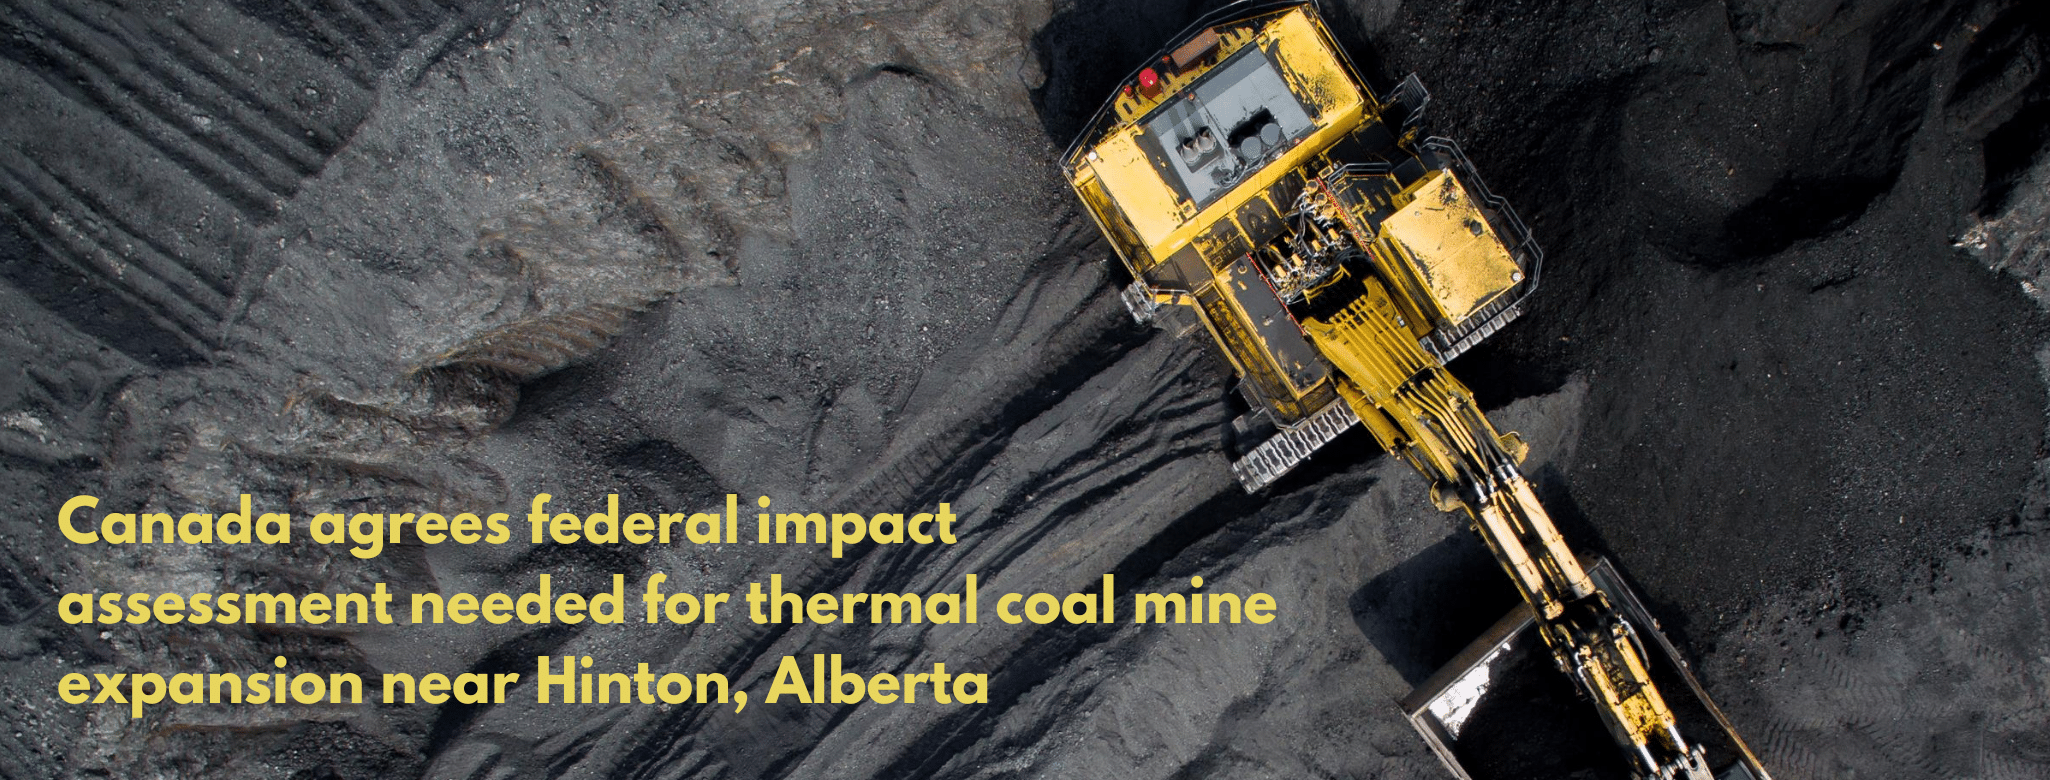 Copy of Canada agrees federal impact assessment needed for thermal coal mine in Alberta